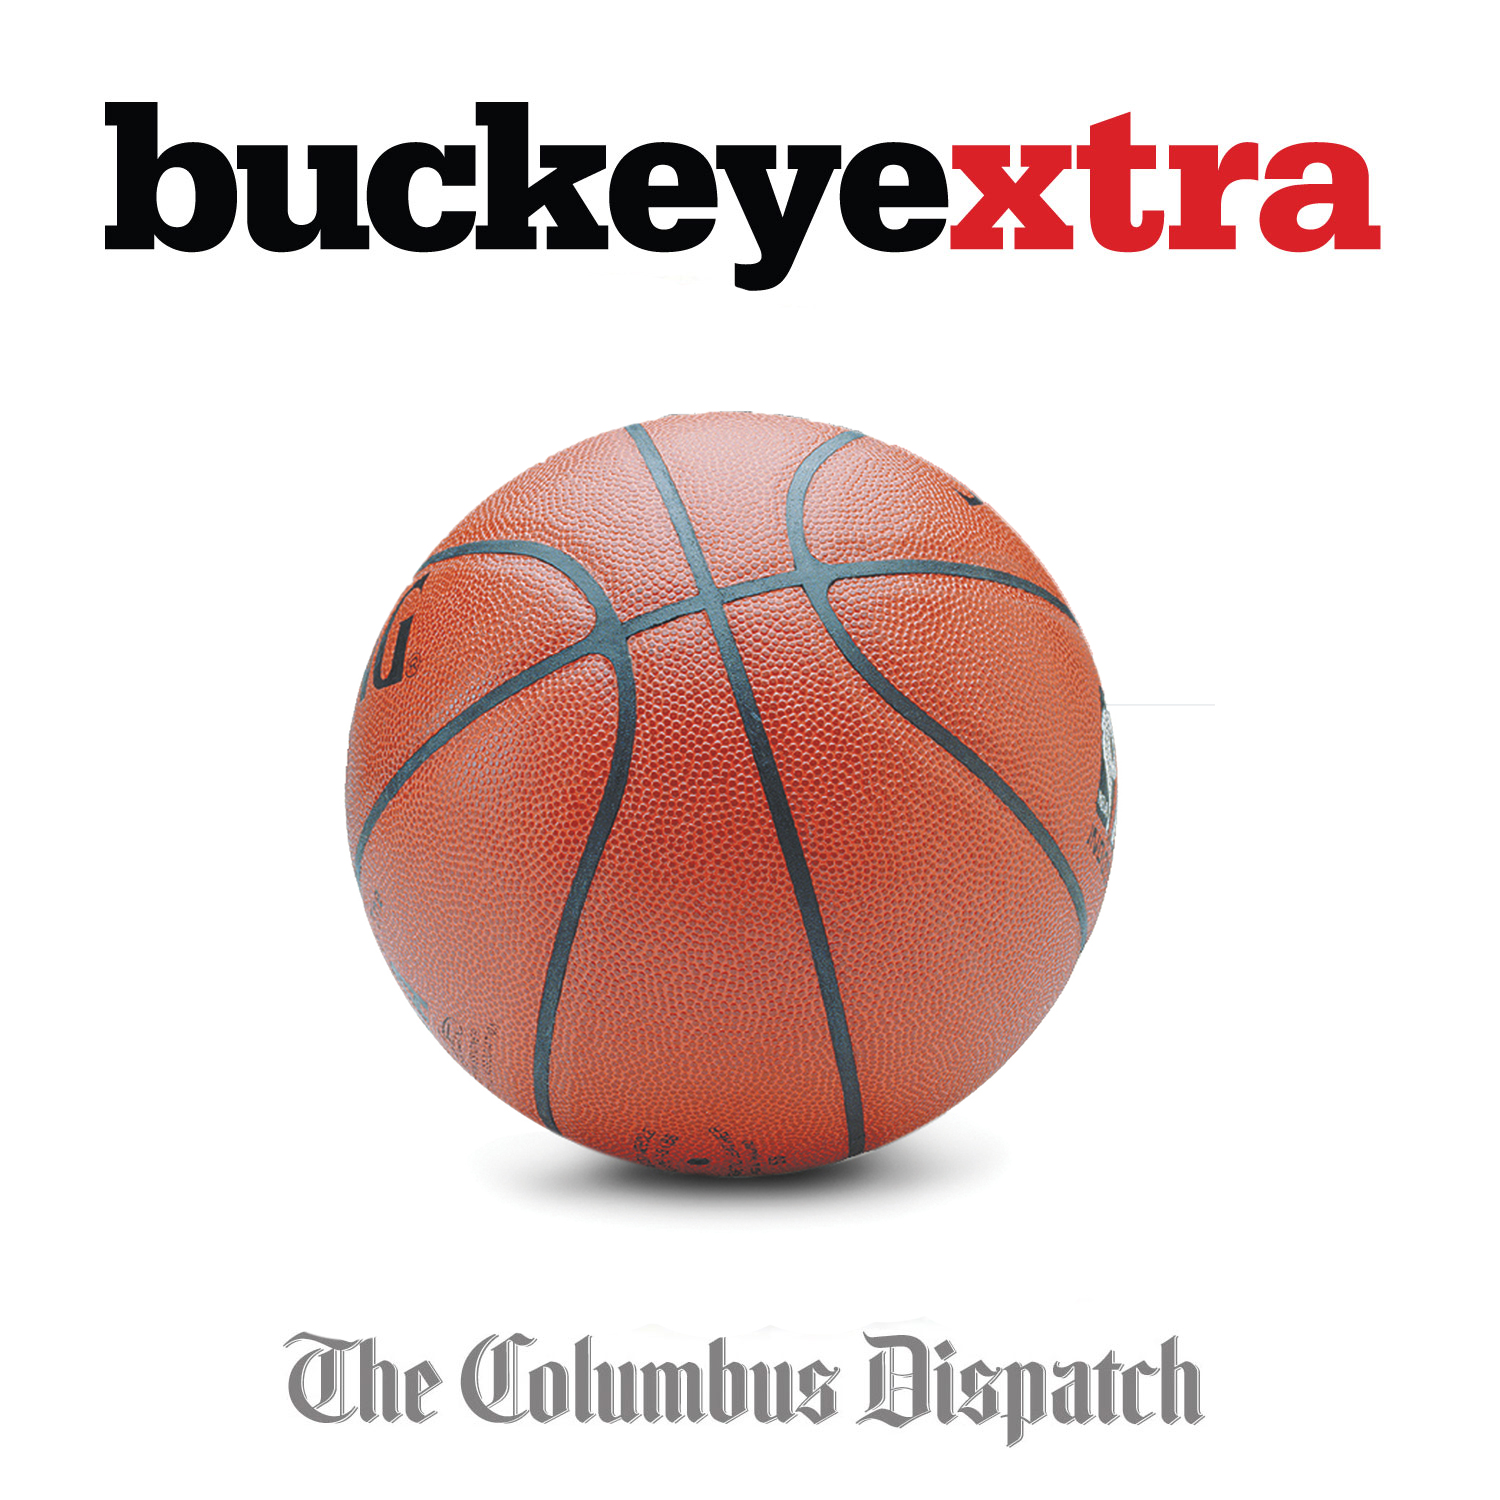 Buckeyes handle Michigan State in 68-58 victory